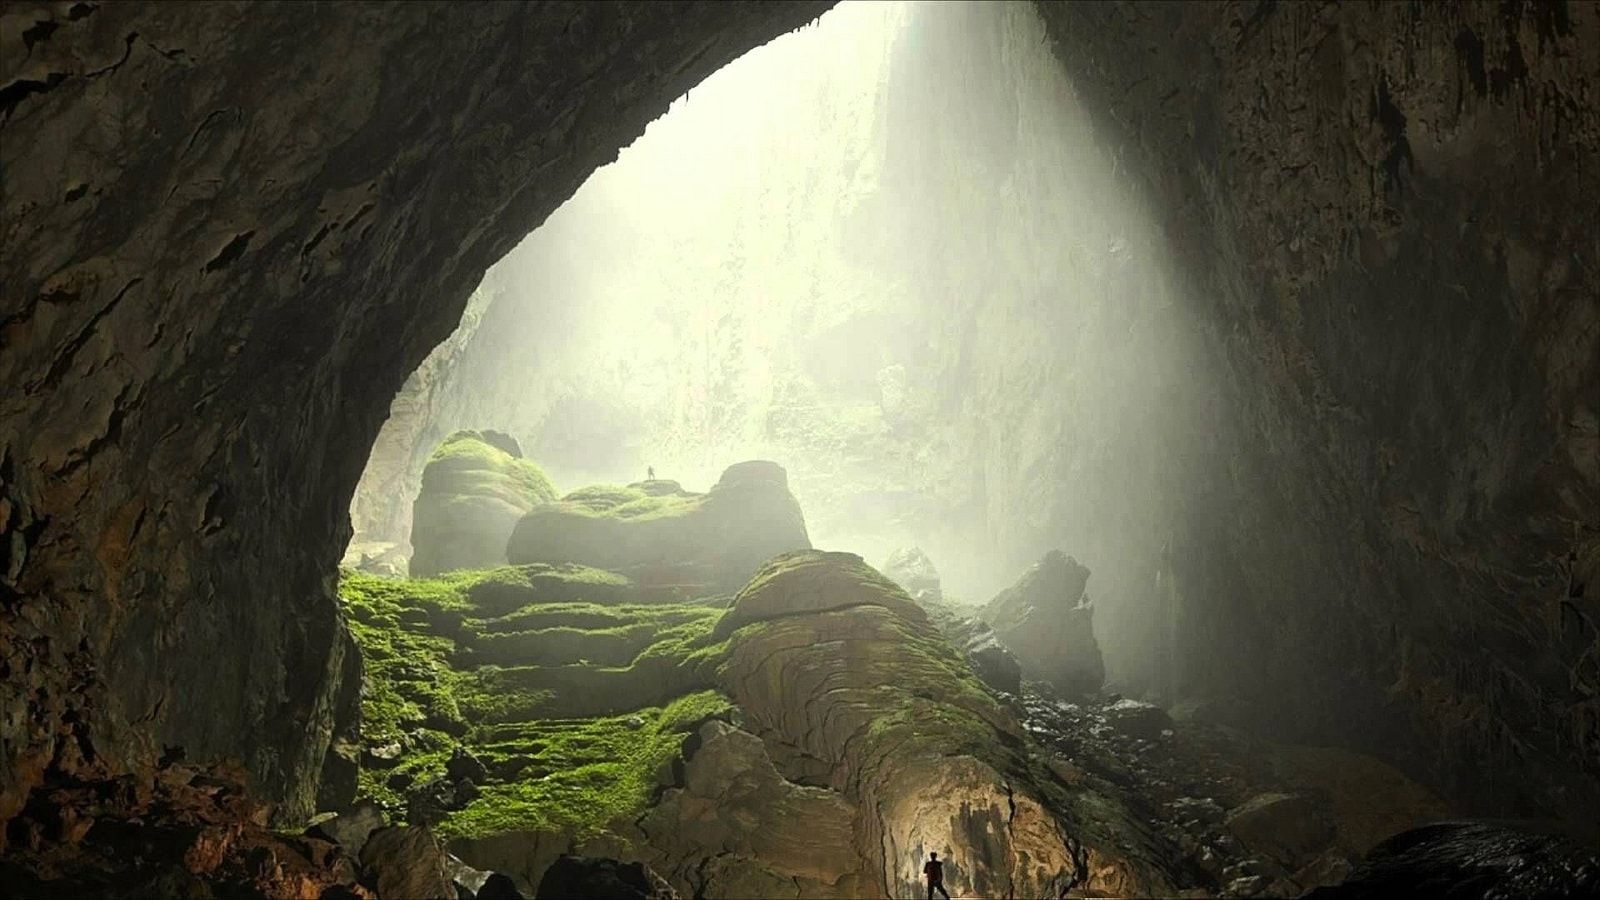 Son Doong Cave - world's largest natural caves